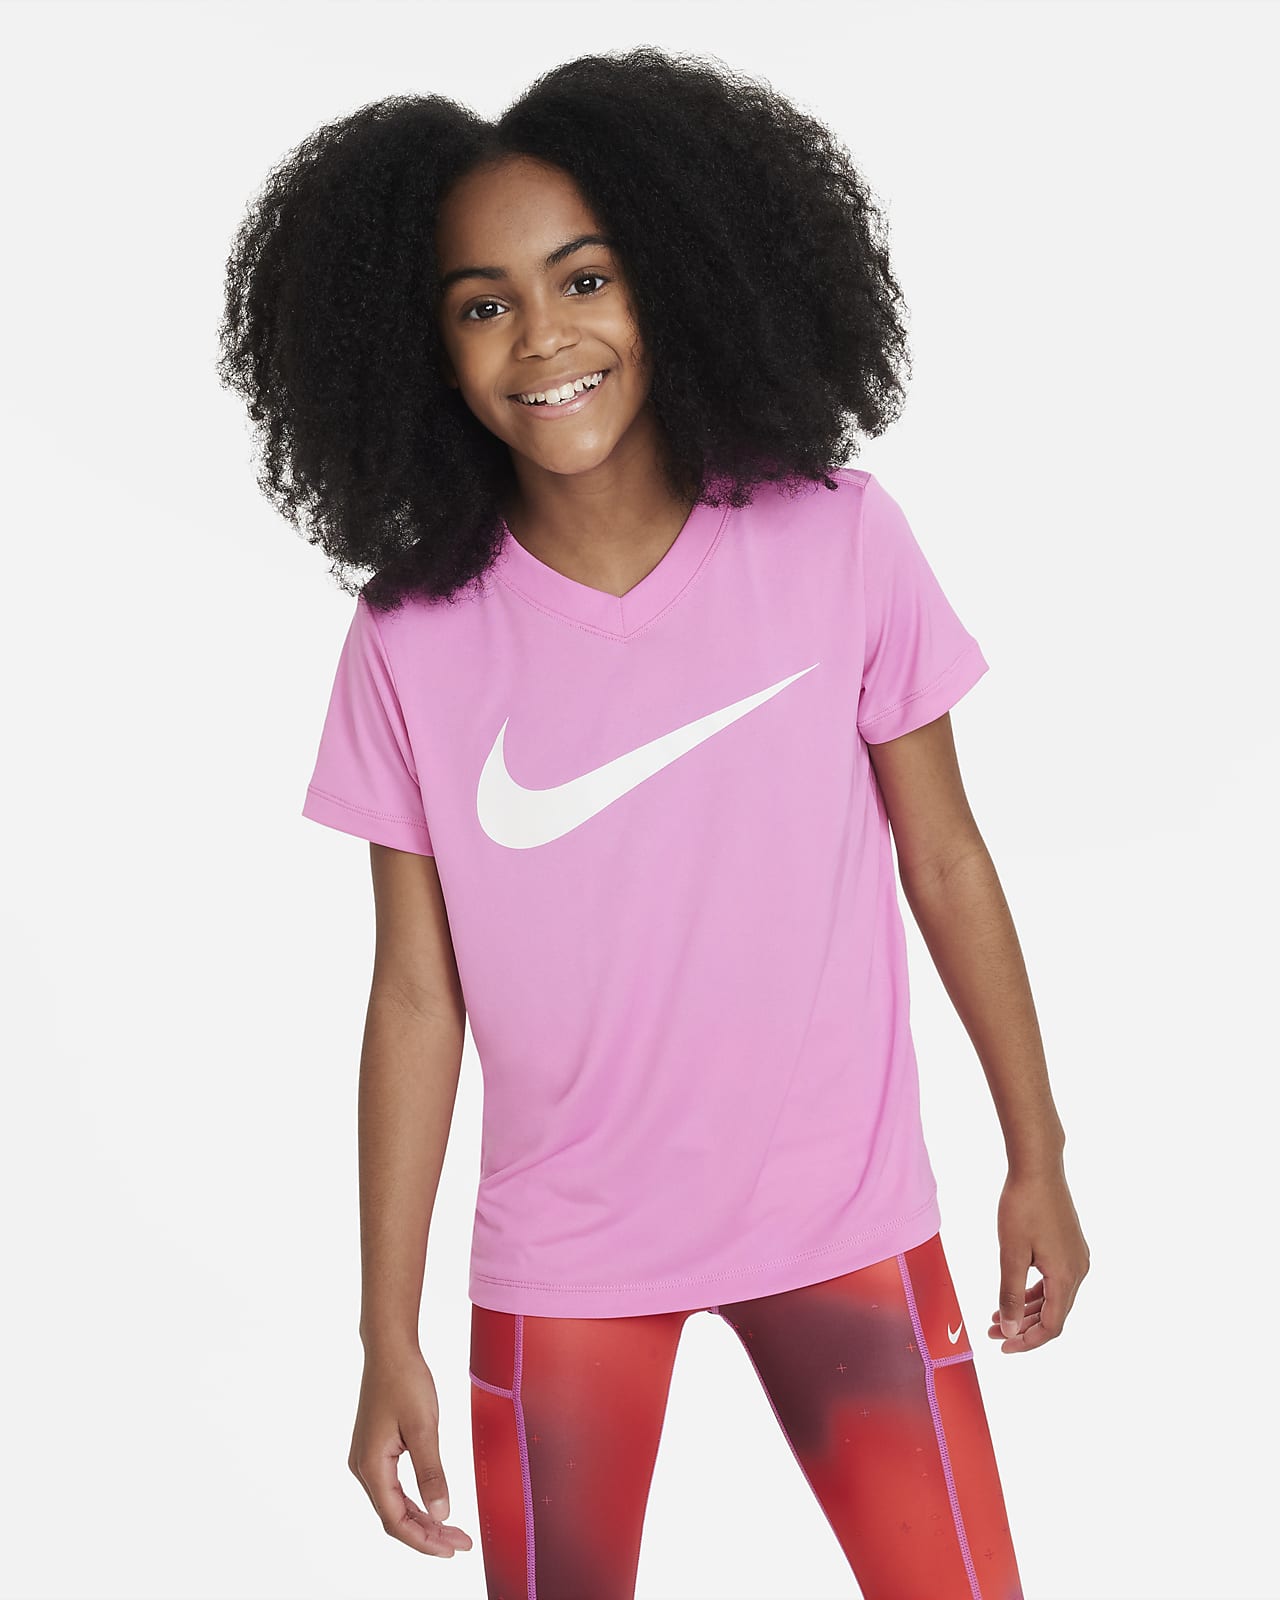 Under Armour Women's UA Tech V-Neck T-Shirt Pink Size Extra Large